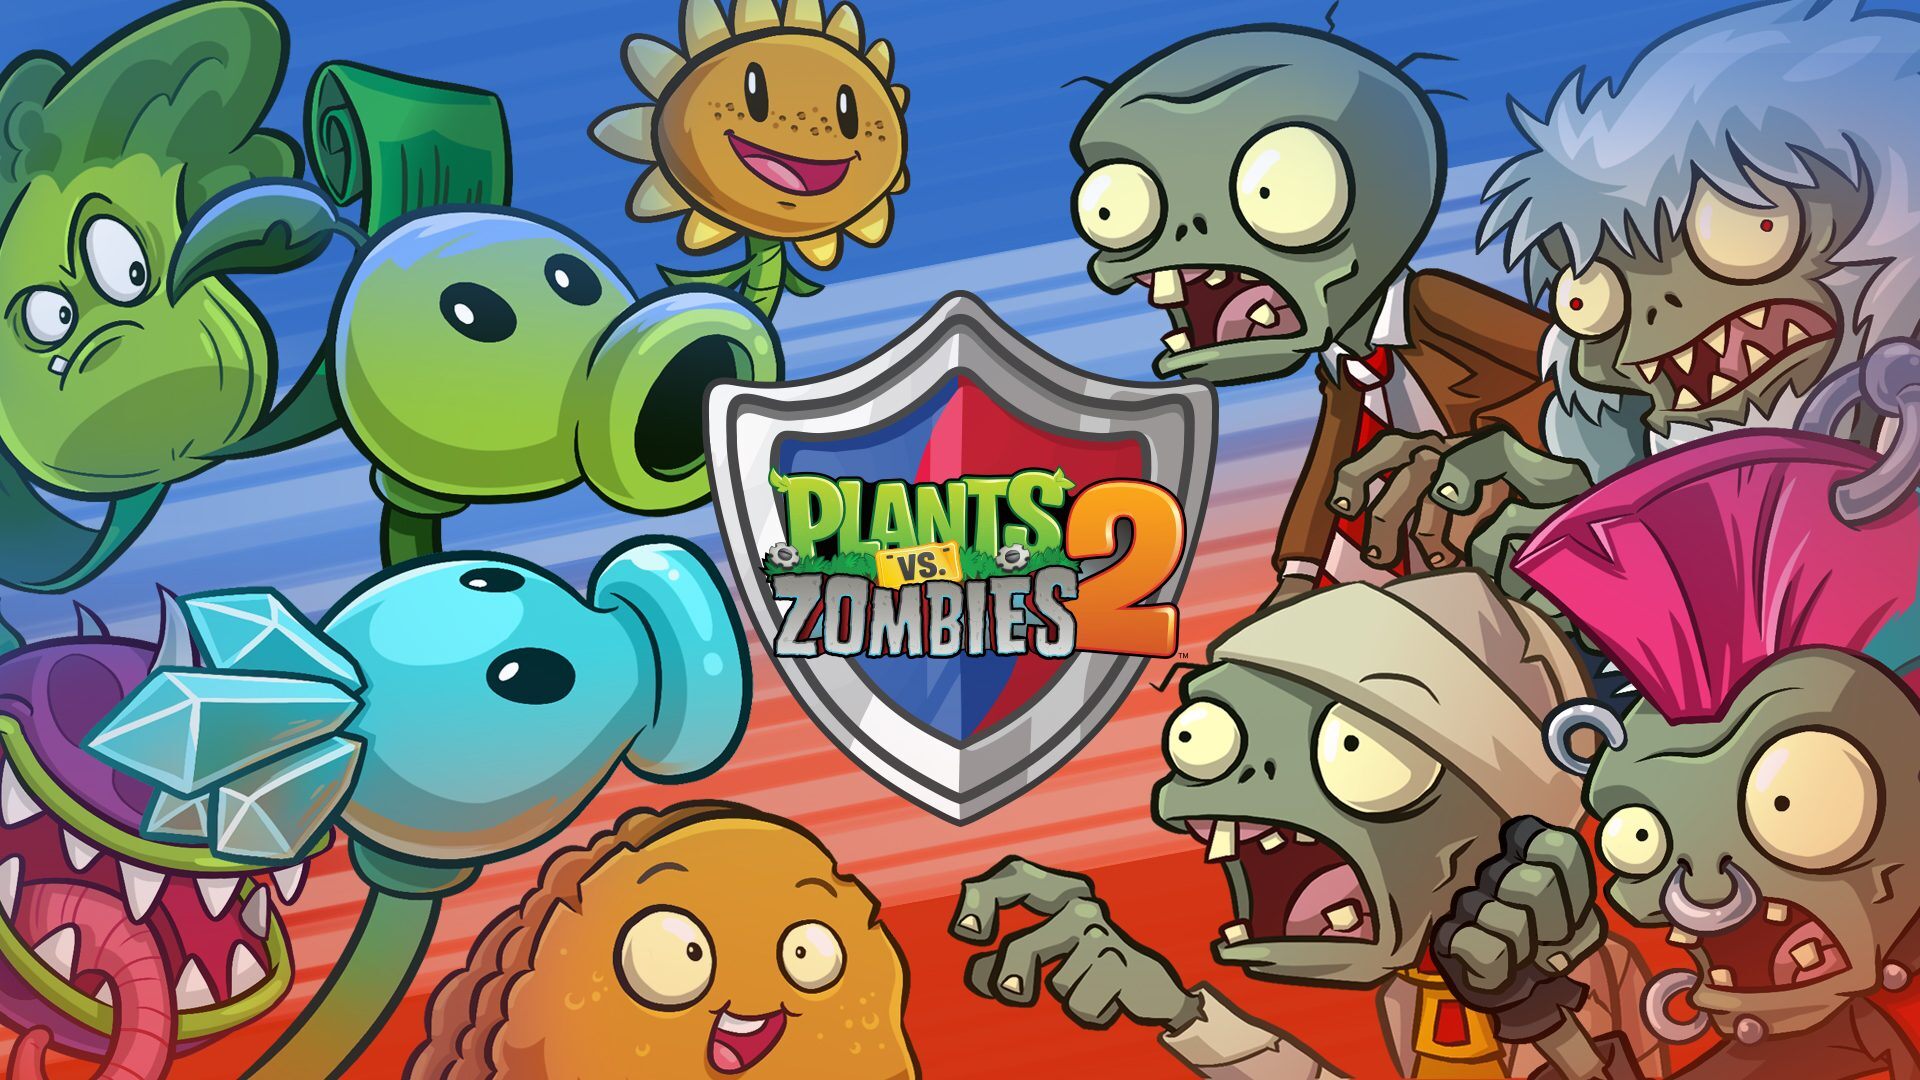 plants vs zombies 2 all worlds